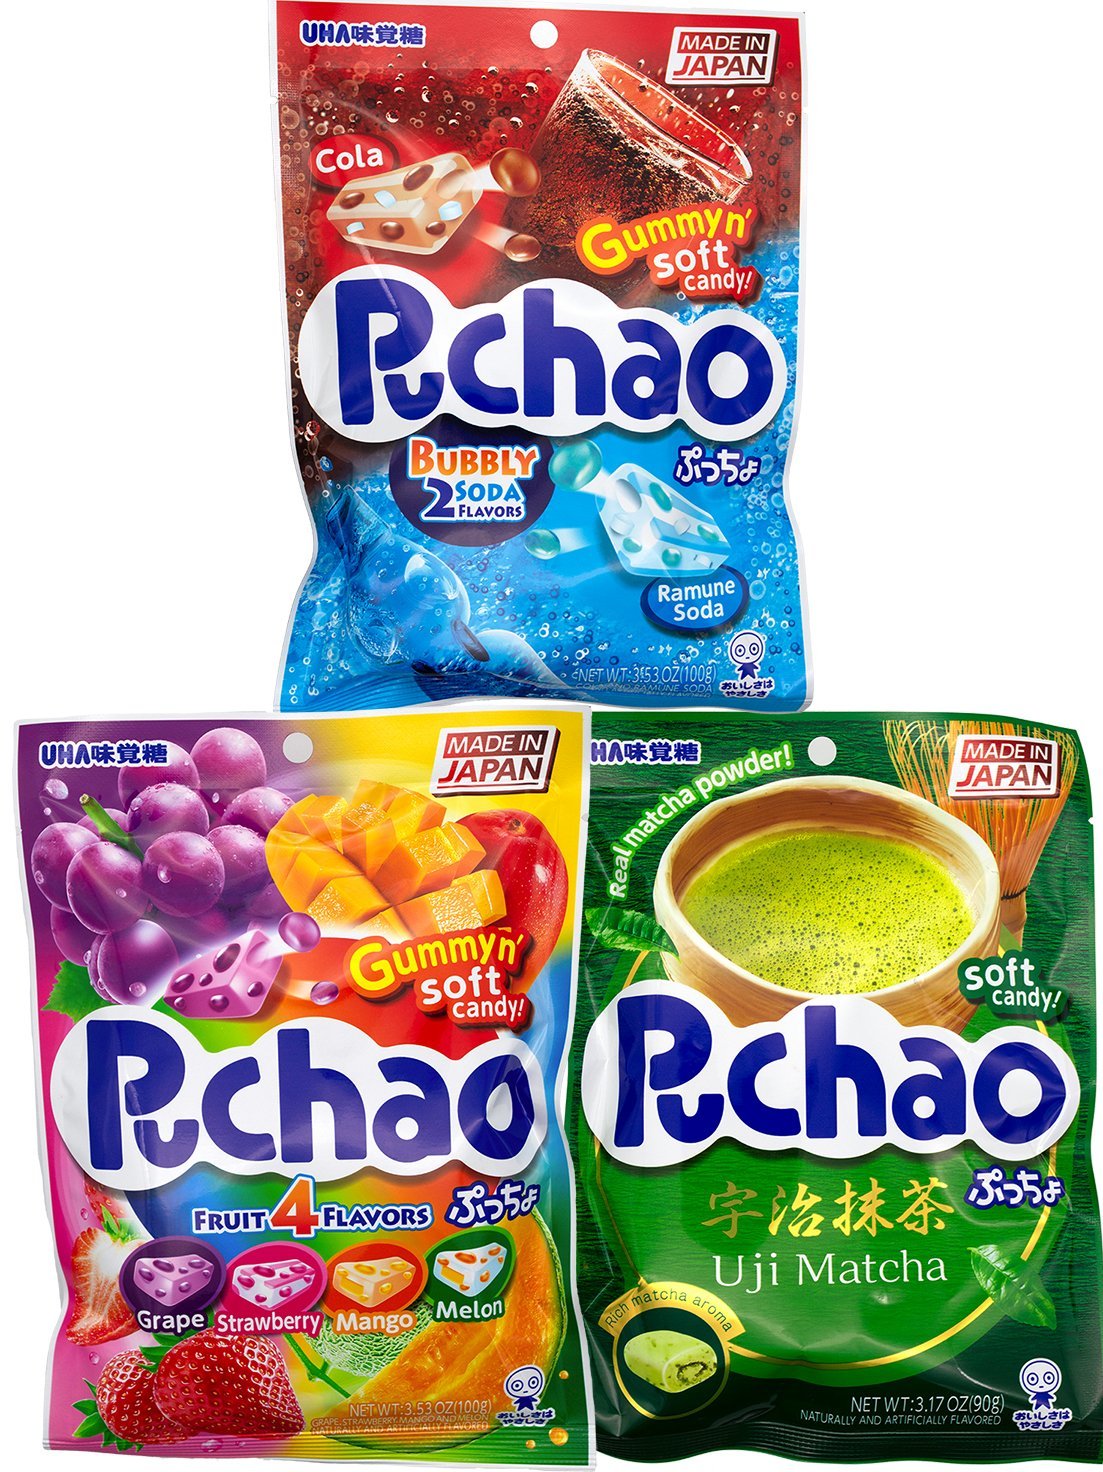 Puchao Gummy n' Soft Candy Puchao Variety 3 Count 